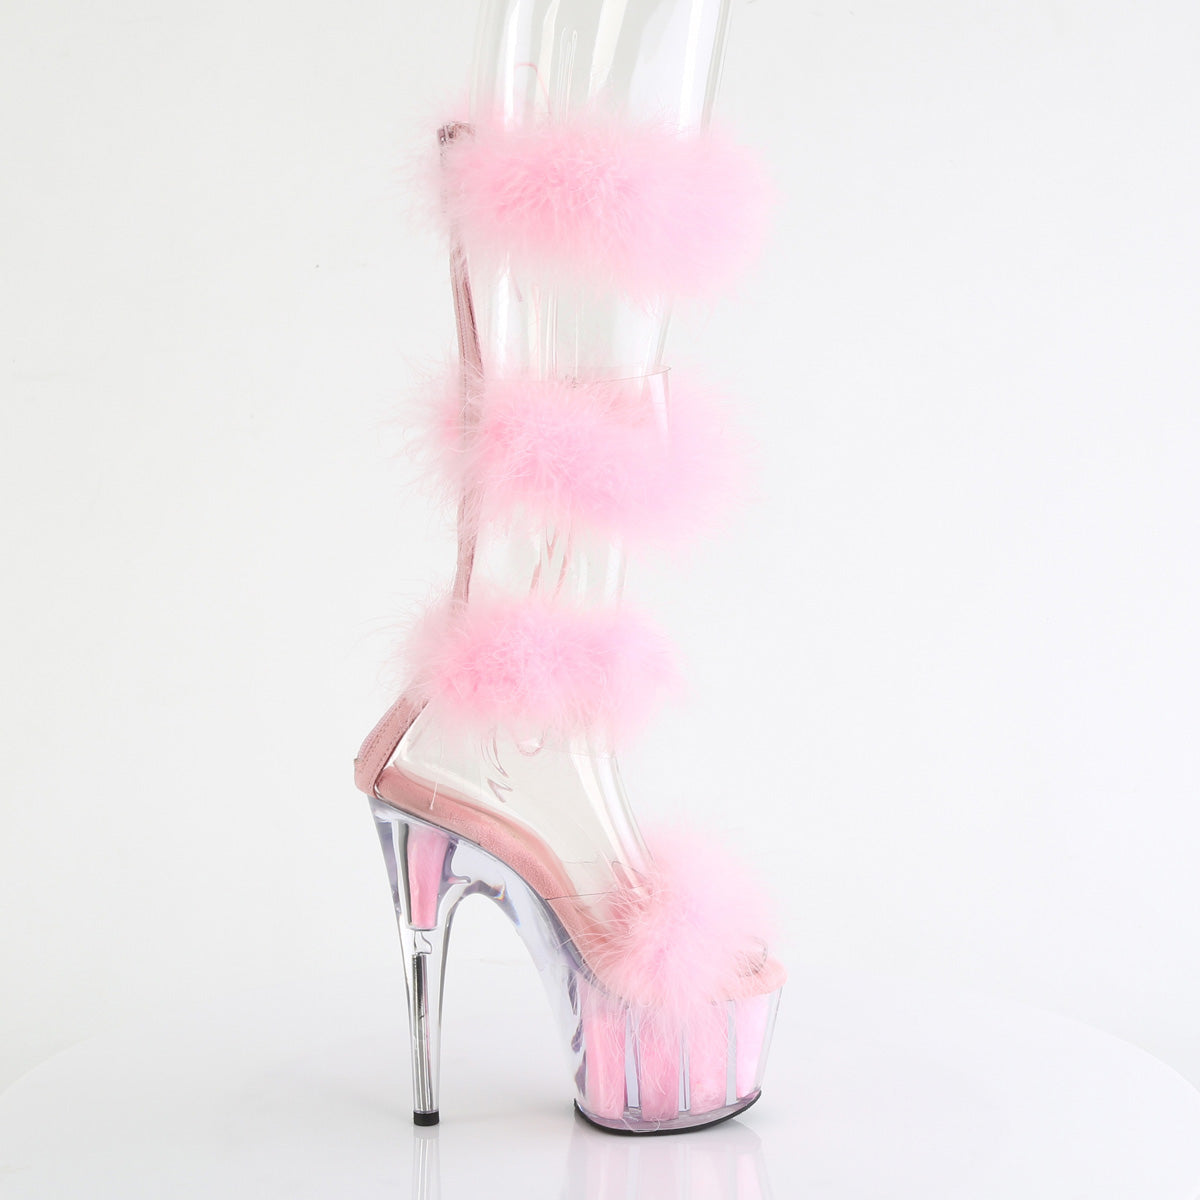 fur baby pink pole dancer boots adore-728f